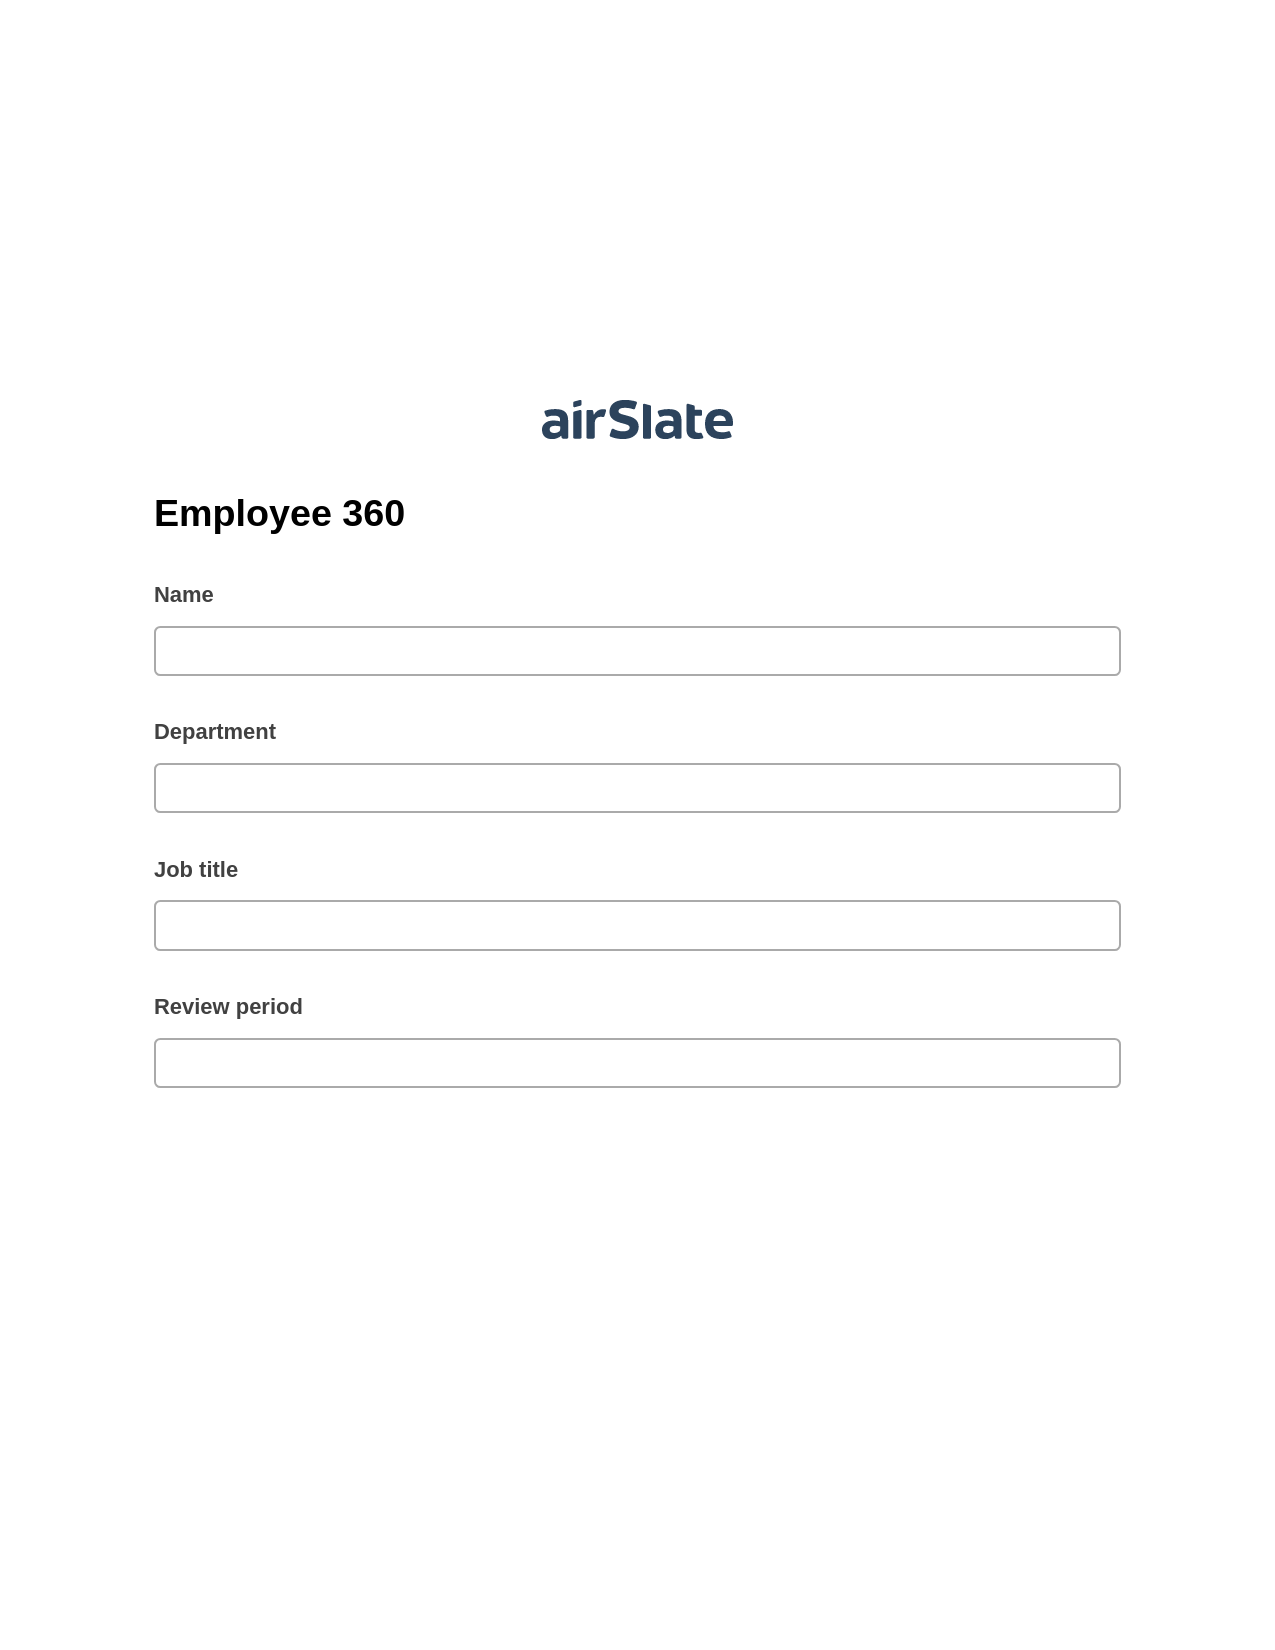 Employee 360 Pre-fill from Salesforce Records Bot, Export to MS Dynamics 365 Bot, Archive to Dropbox Bot